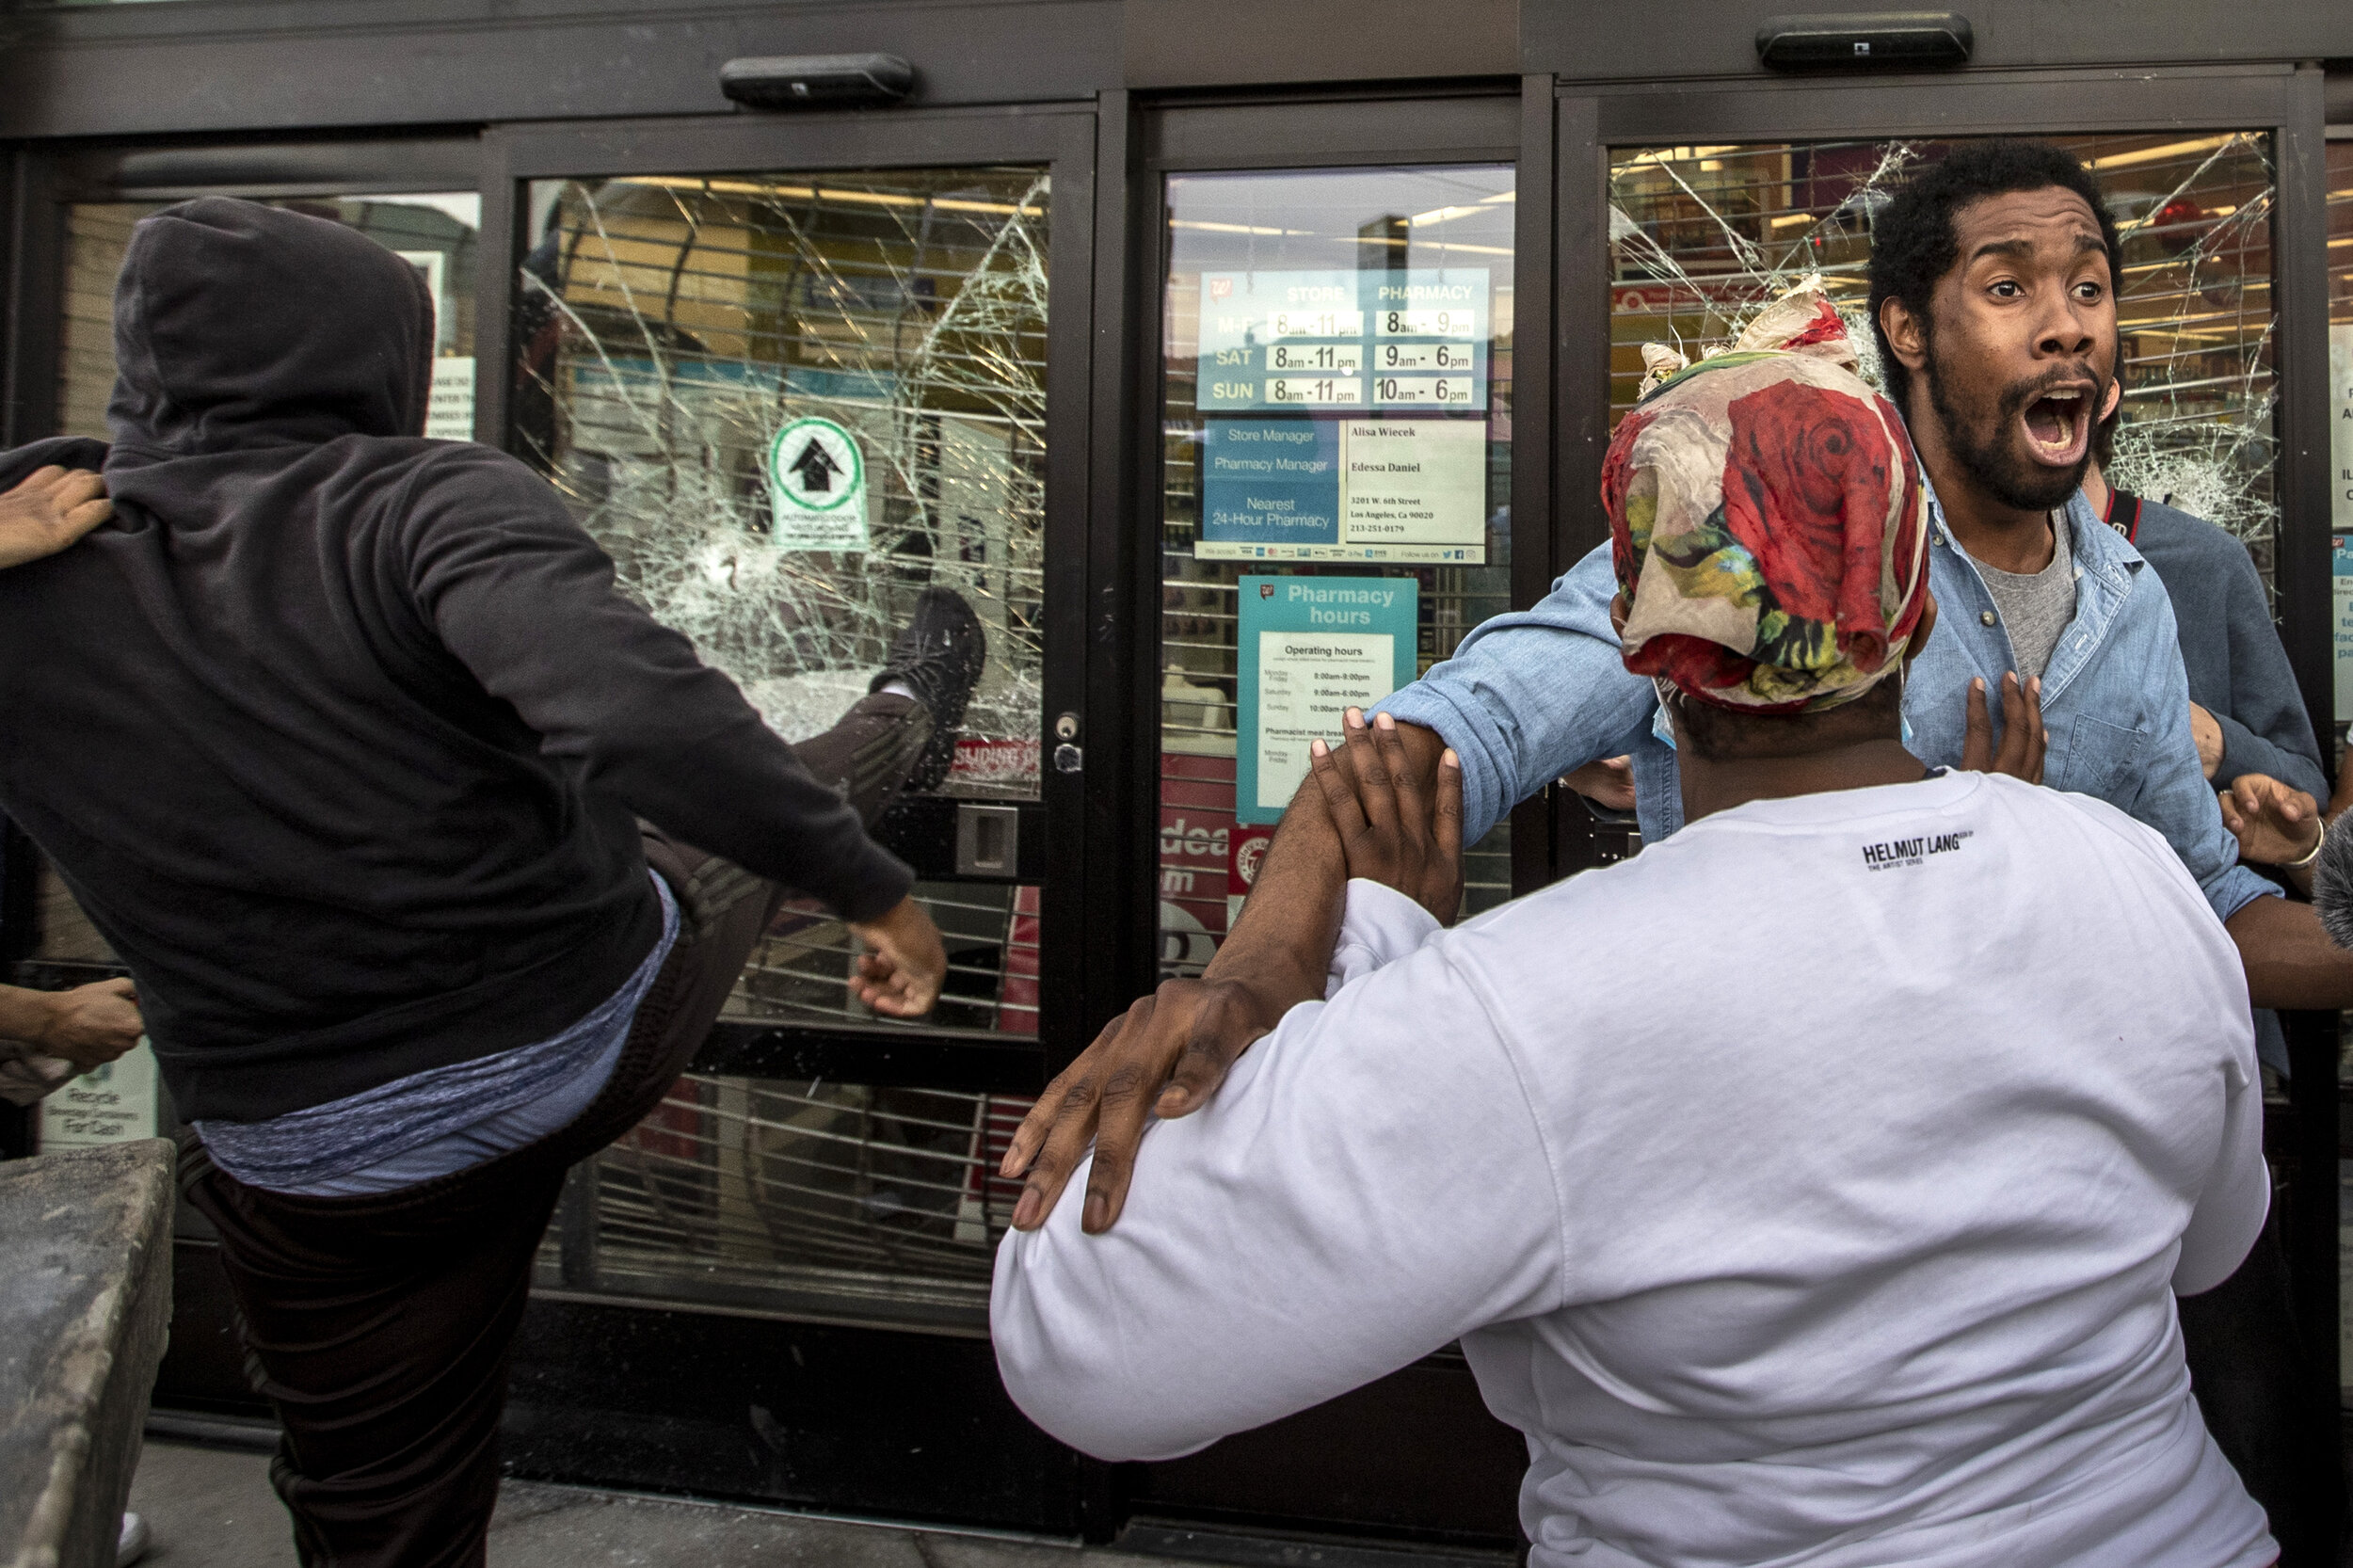  AJ Lovelace tries to stop looters from breaking into a Walgreens store at Santa Monica and Highland.  “We need peace and we need someone to talk to each other,” he said after the looters fled the scene. He was one of hundreds of protestors on June 1